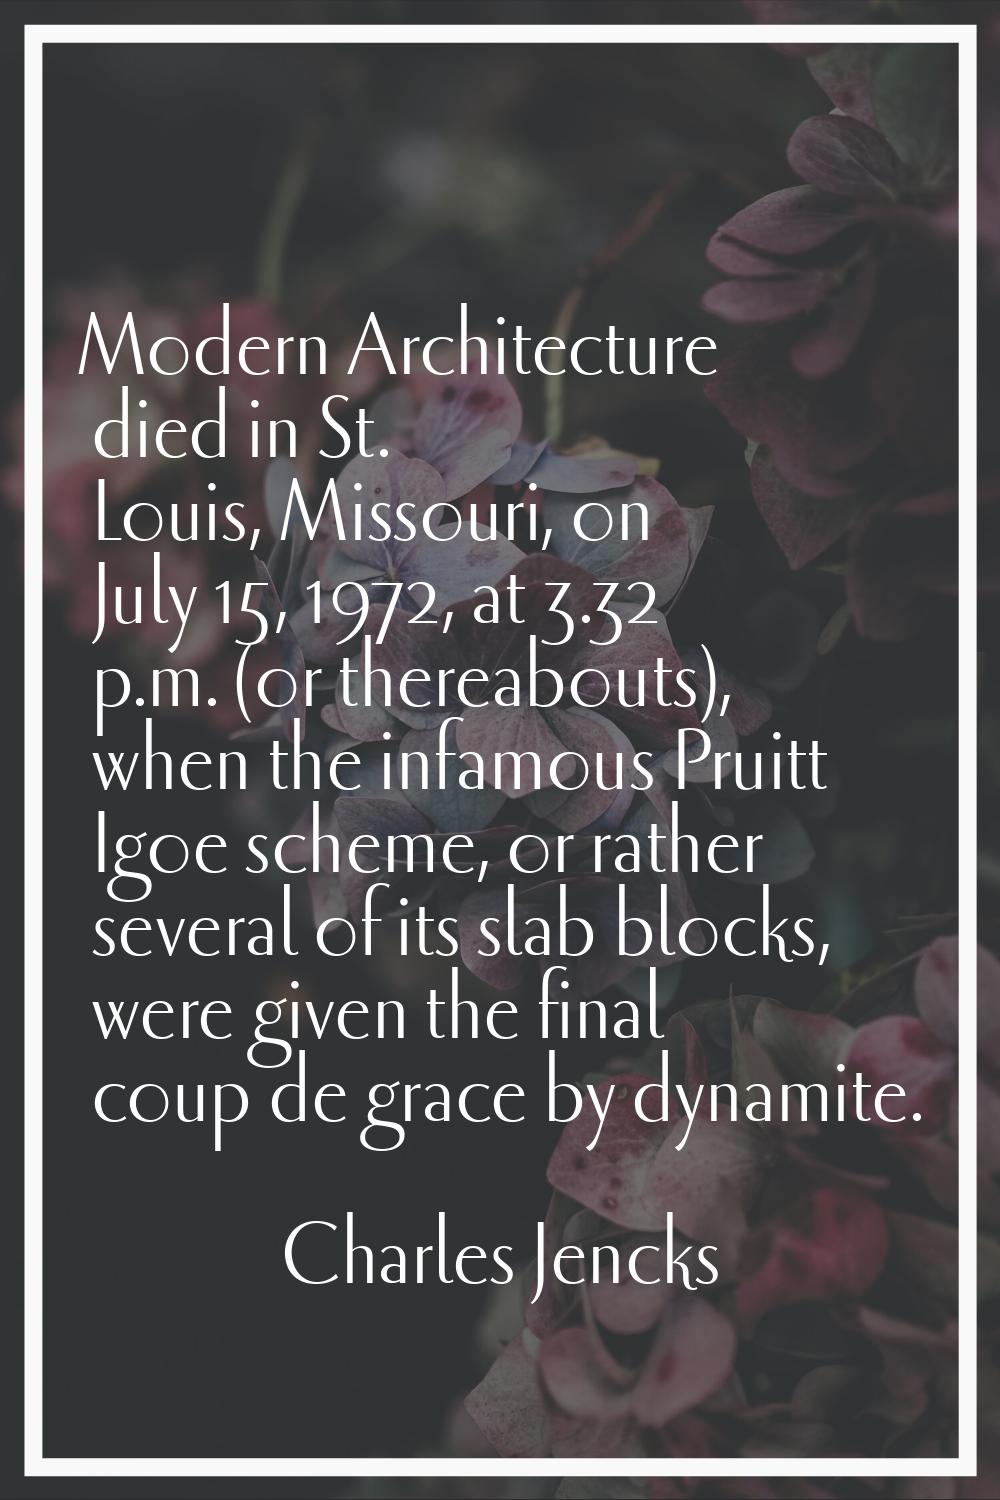 Modern Architecture died in St. Louis, Missouri, on July 15, 1972, at 3.32 p.m. (or thereabouts), w